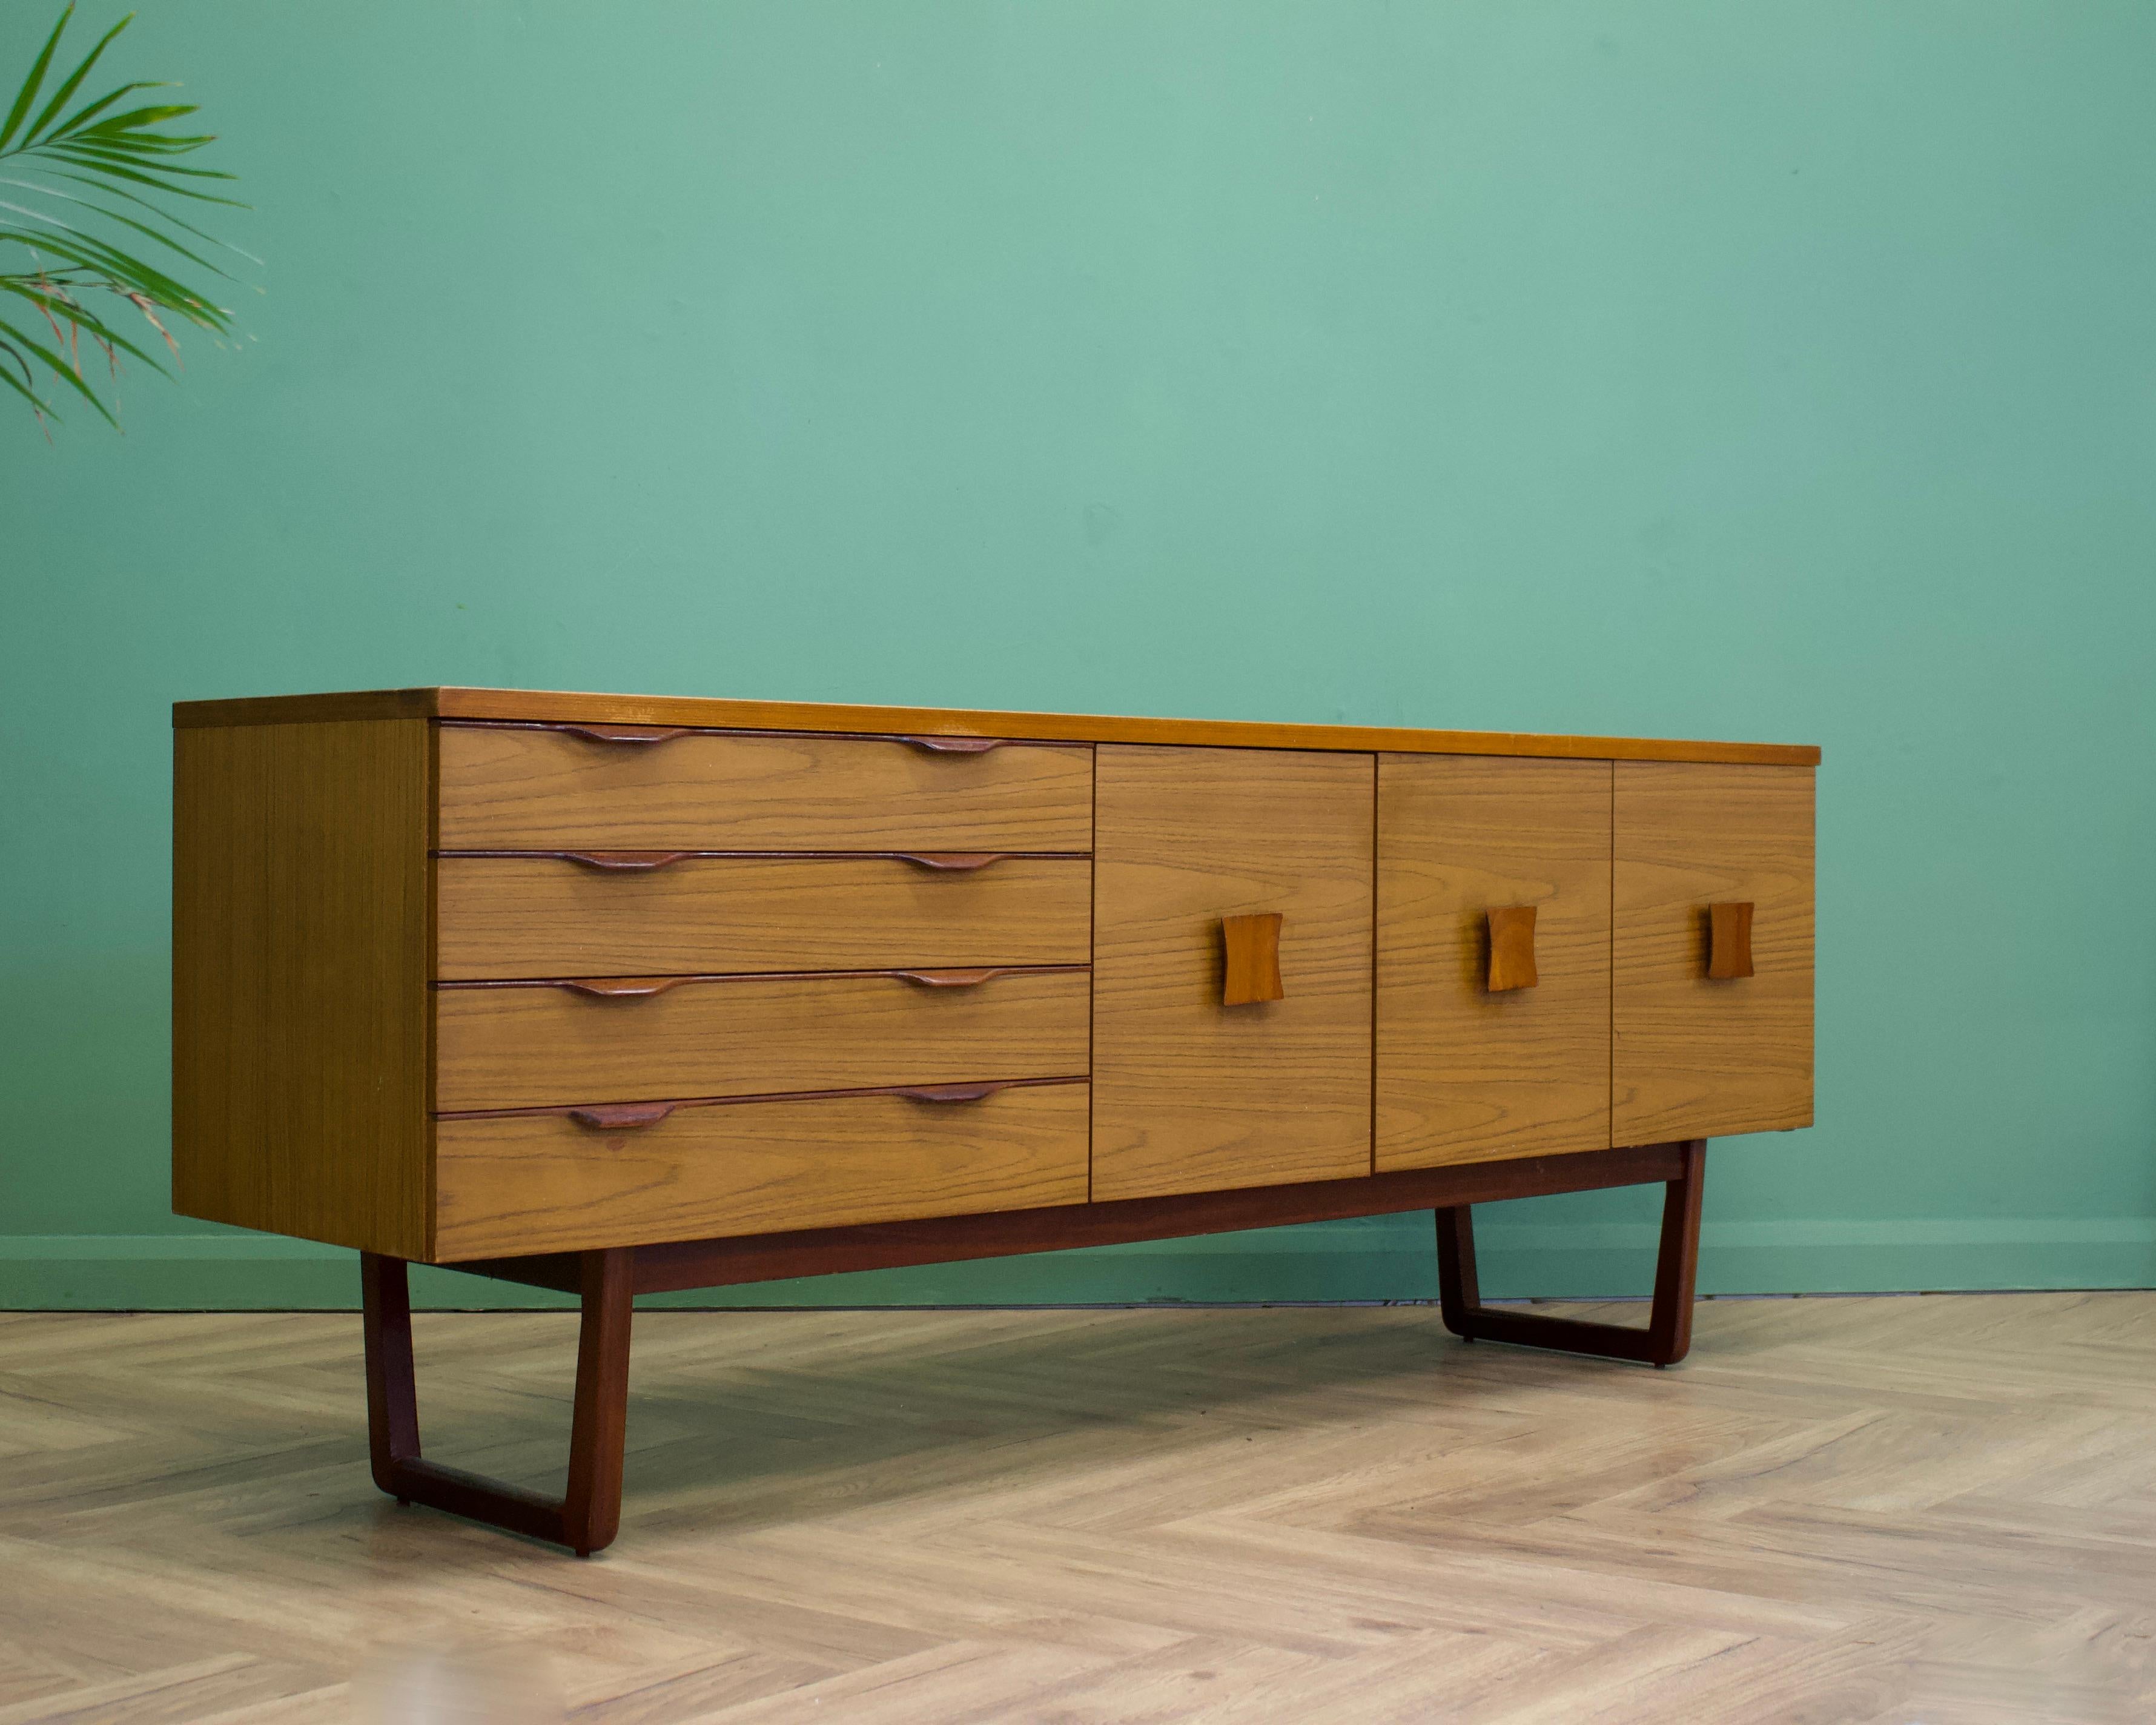 - Mid-Century Modern sideboard.
- Featuring three drawers and two cupboards
- Manufactured in the UK
- By Europa
- Made from teak and teak effect veneer.